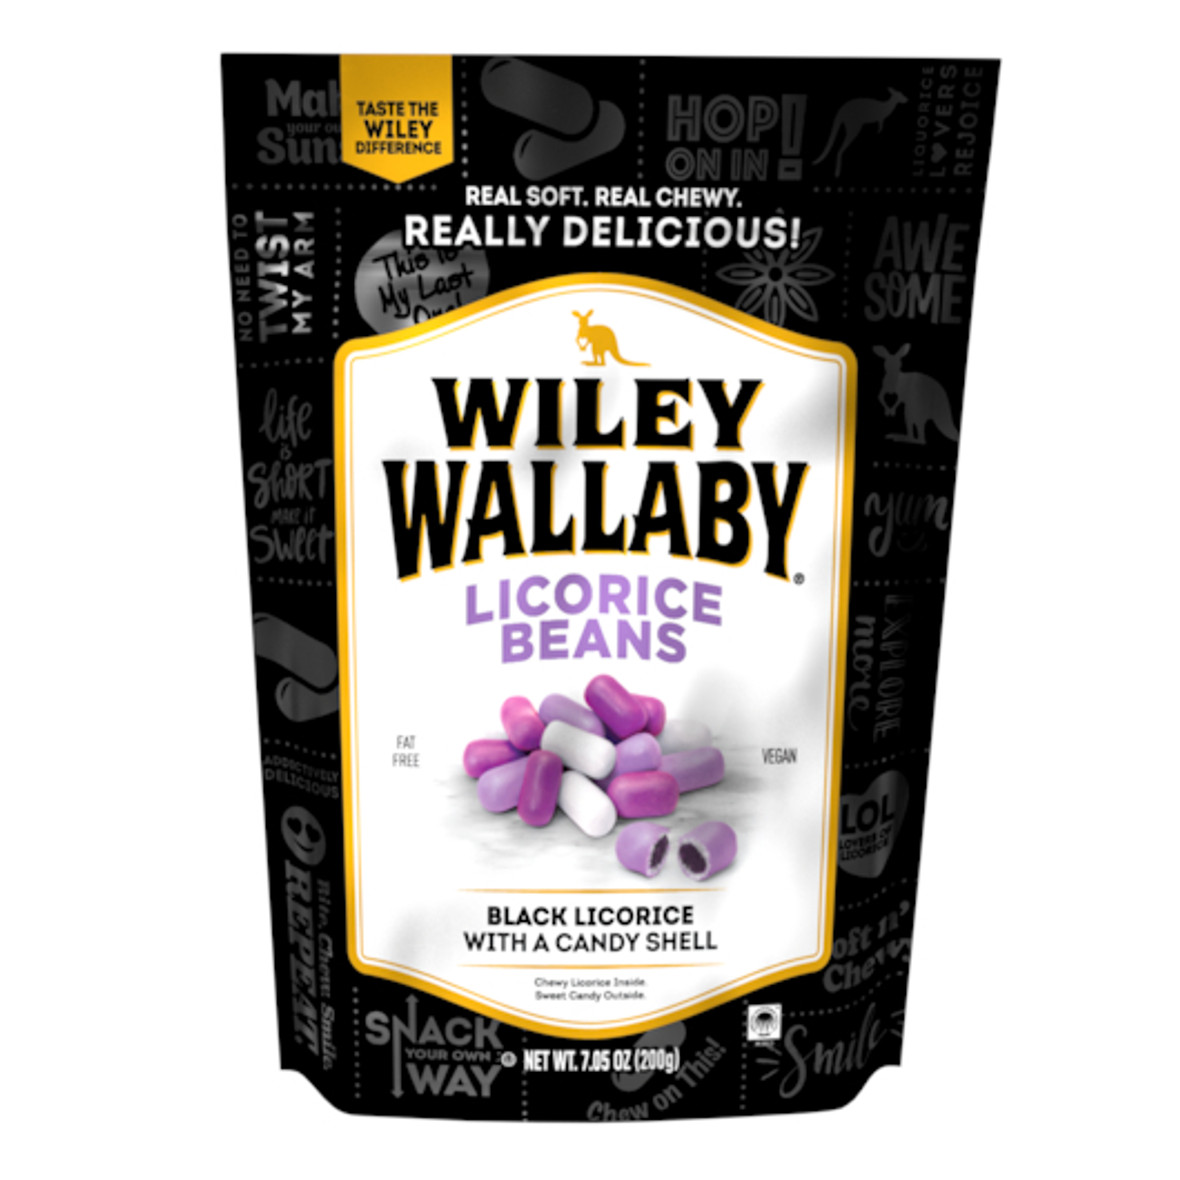 Wiley Wallaby Outback Beans Black Licorice, 7.05 Ounce, 12 Per Case